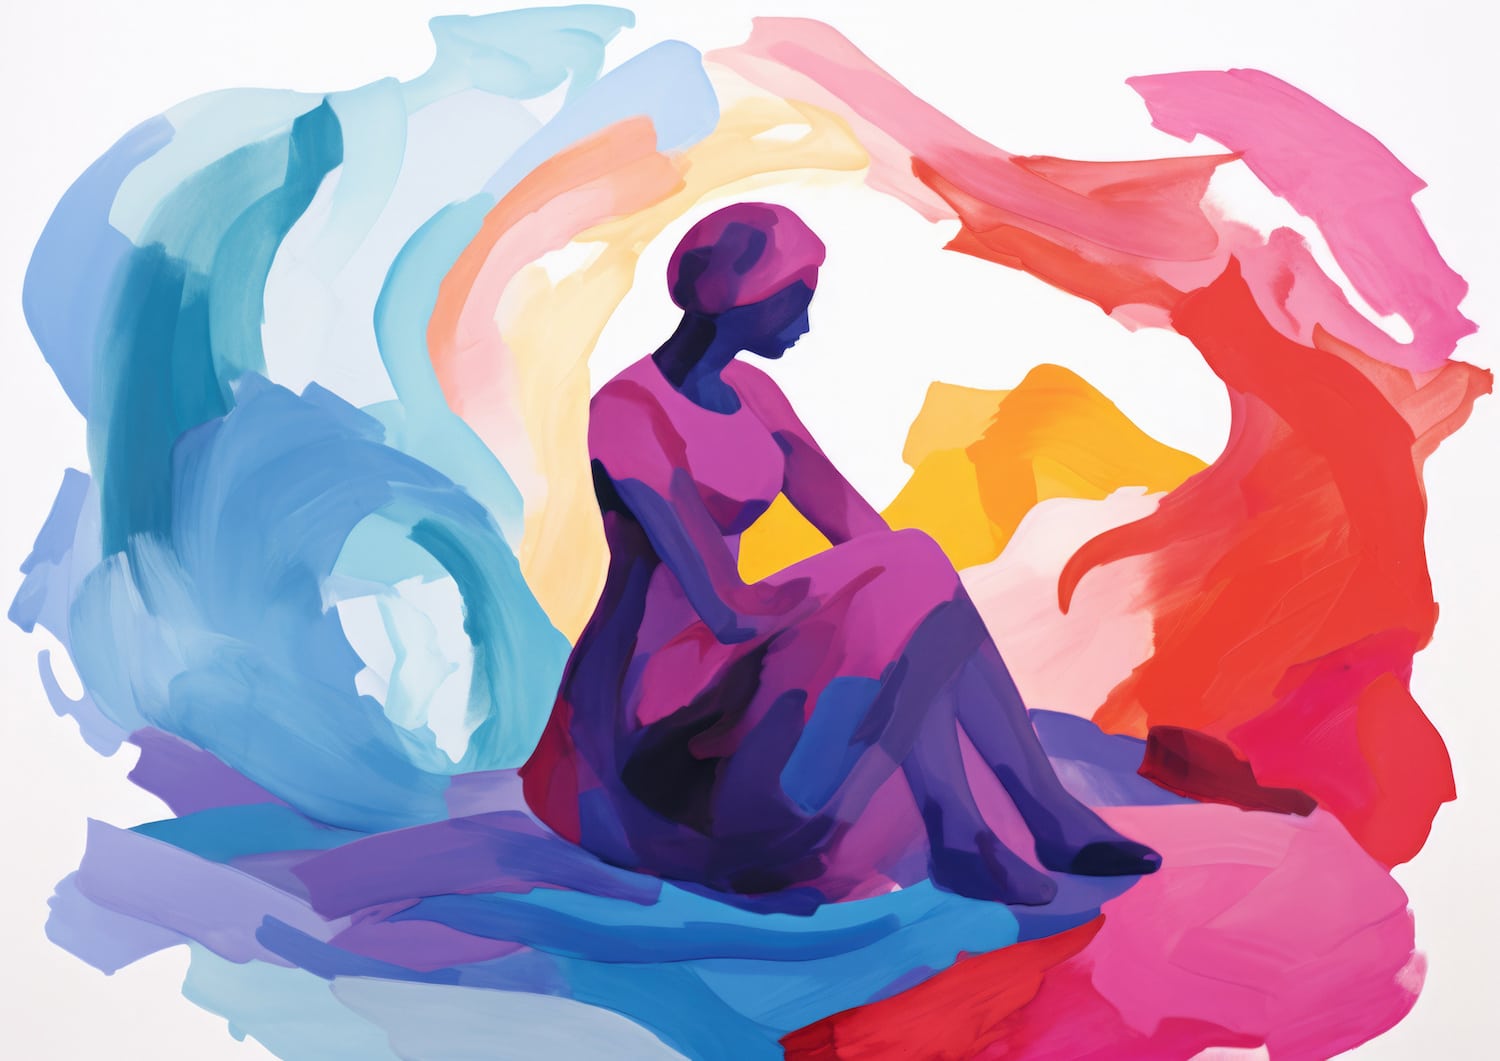 Human figure painting in vibrant watercolor